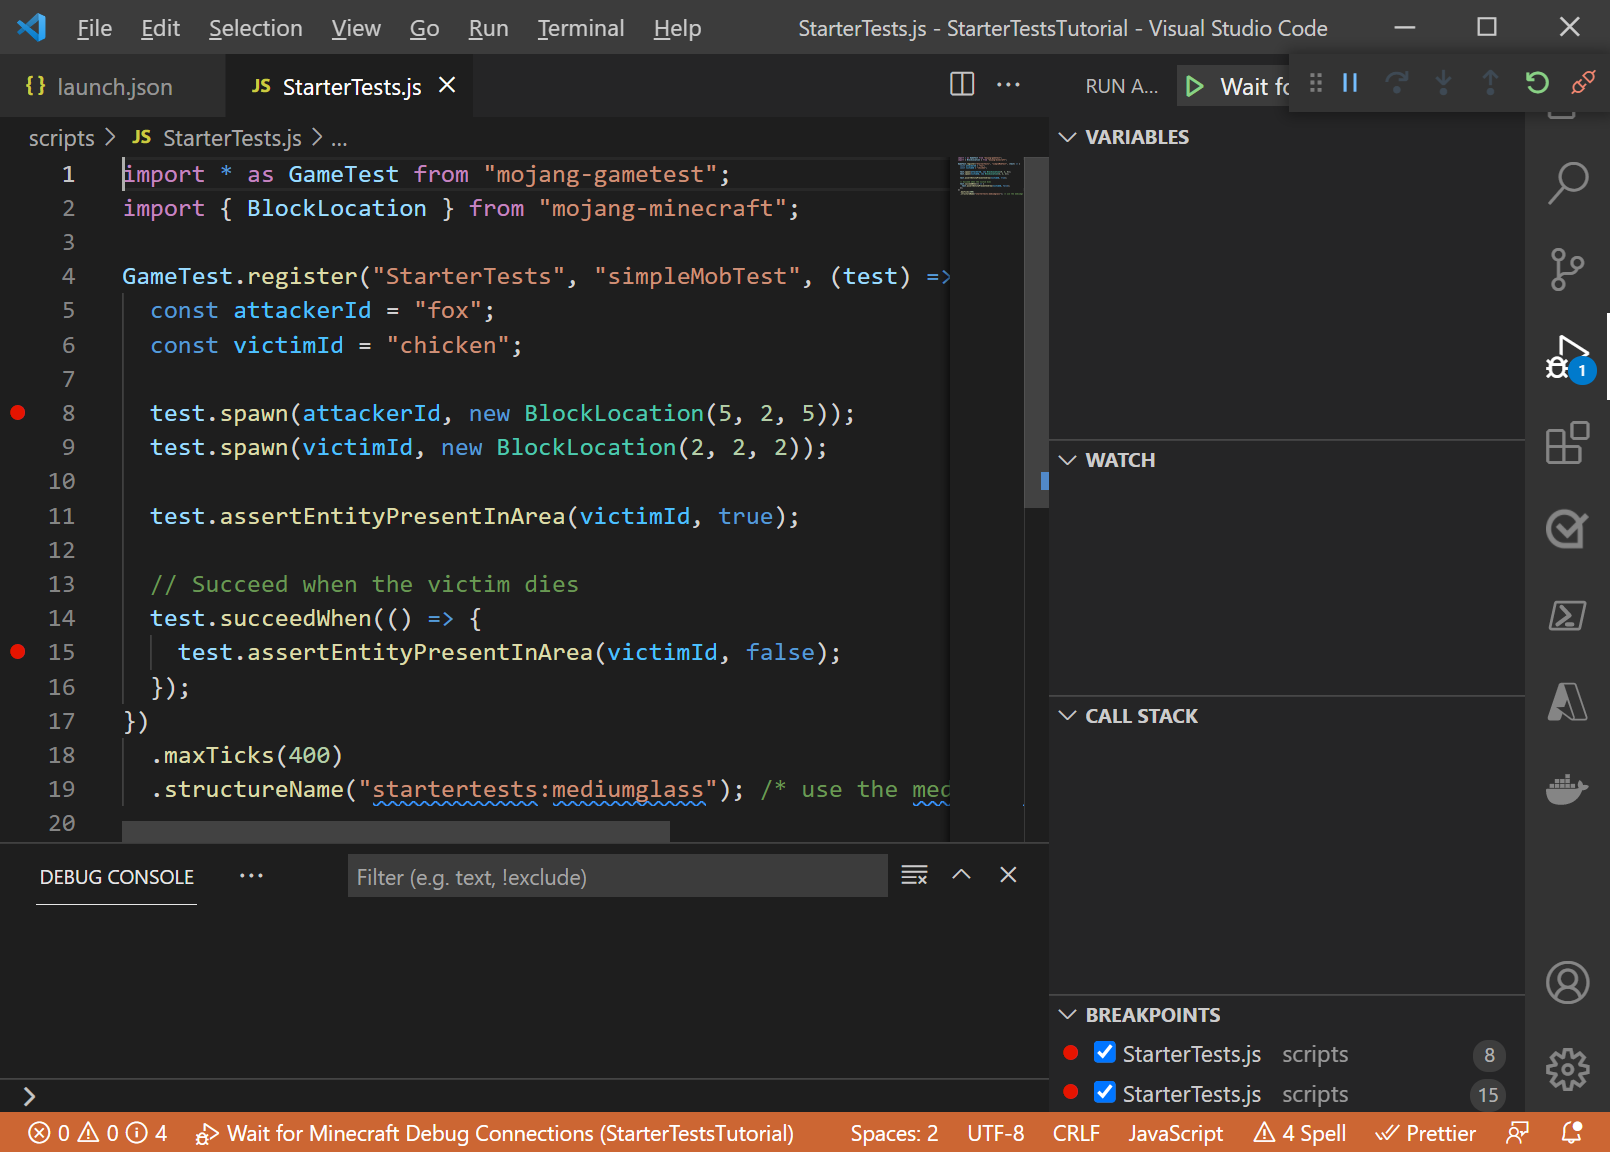 Breakpoints set within Visual Studio Code